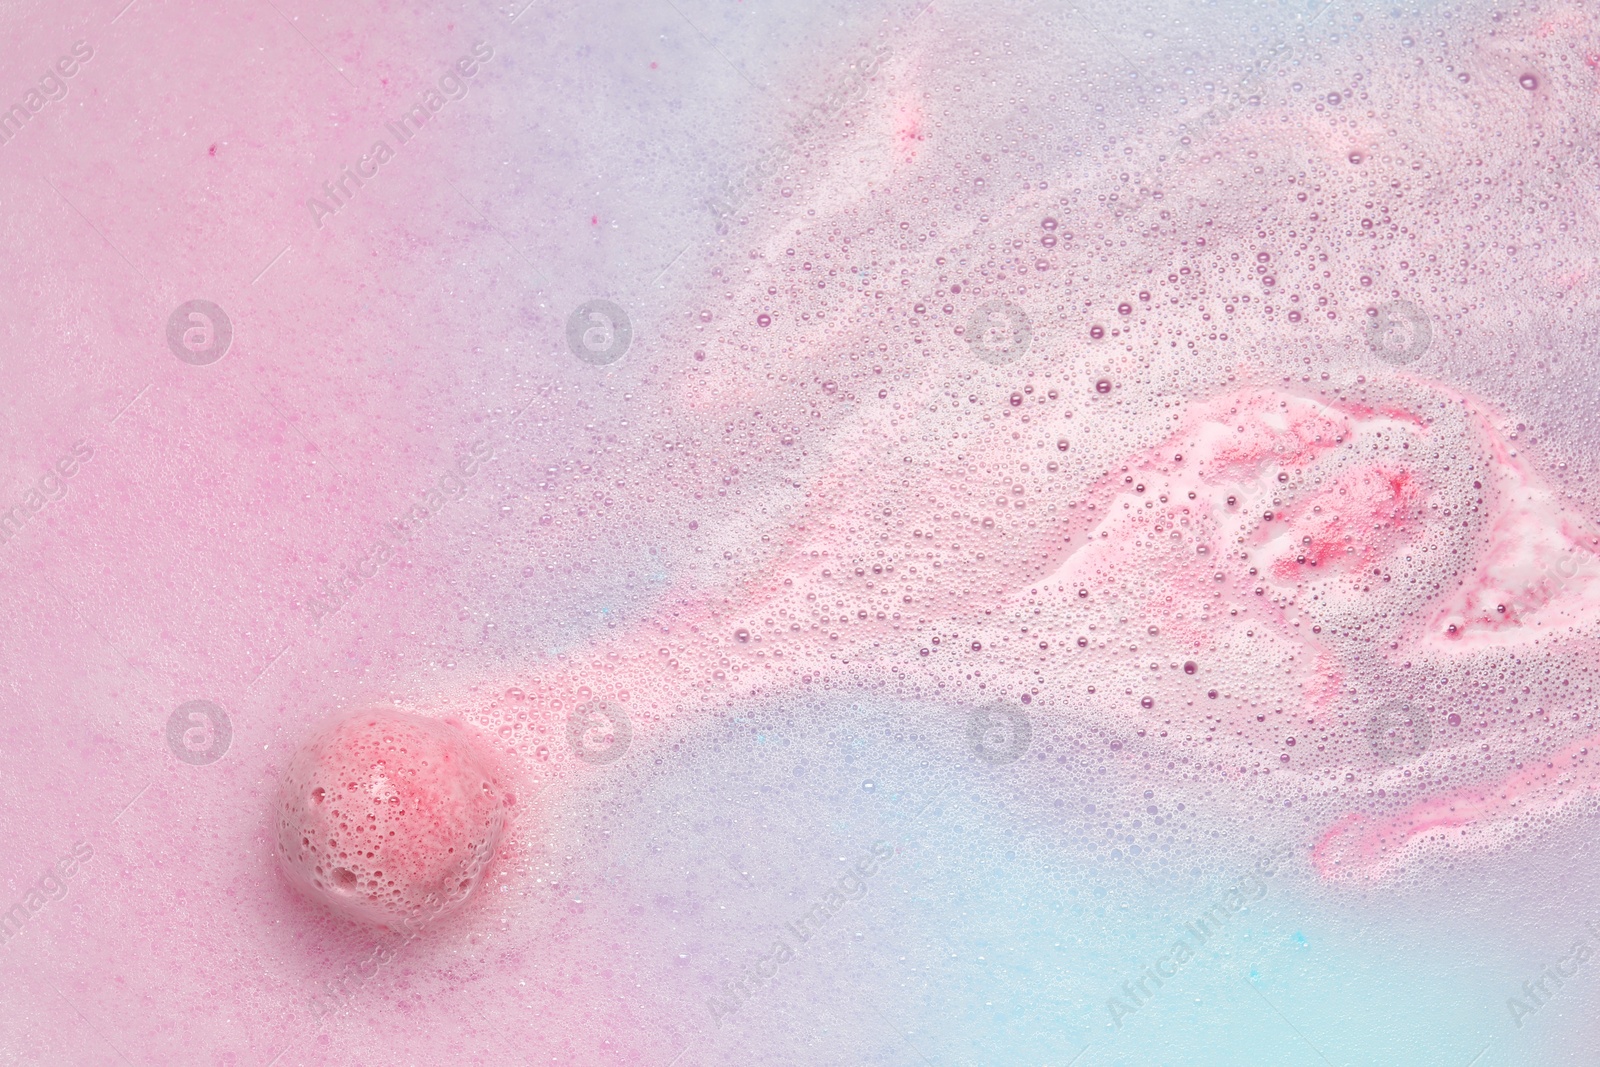 Photo of Beautiful pink bath bomb dissolving in water